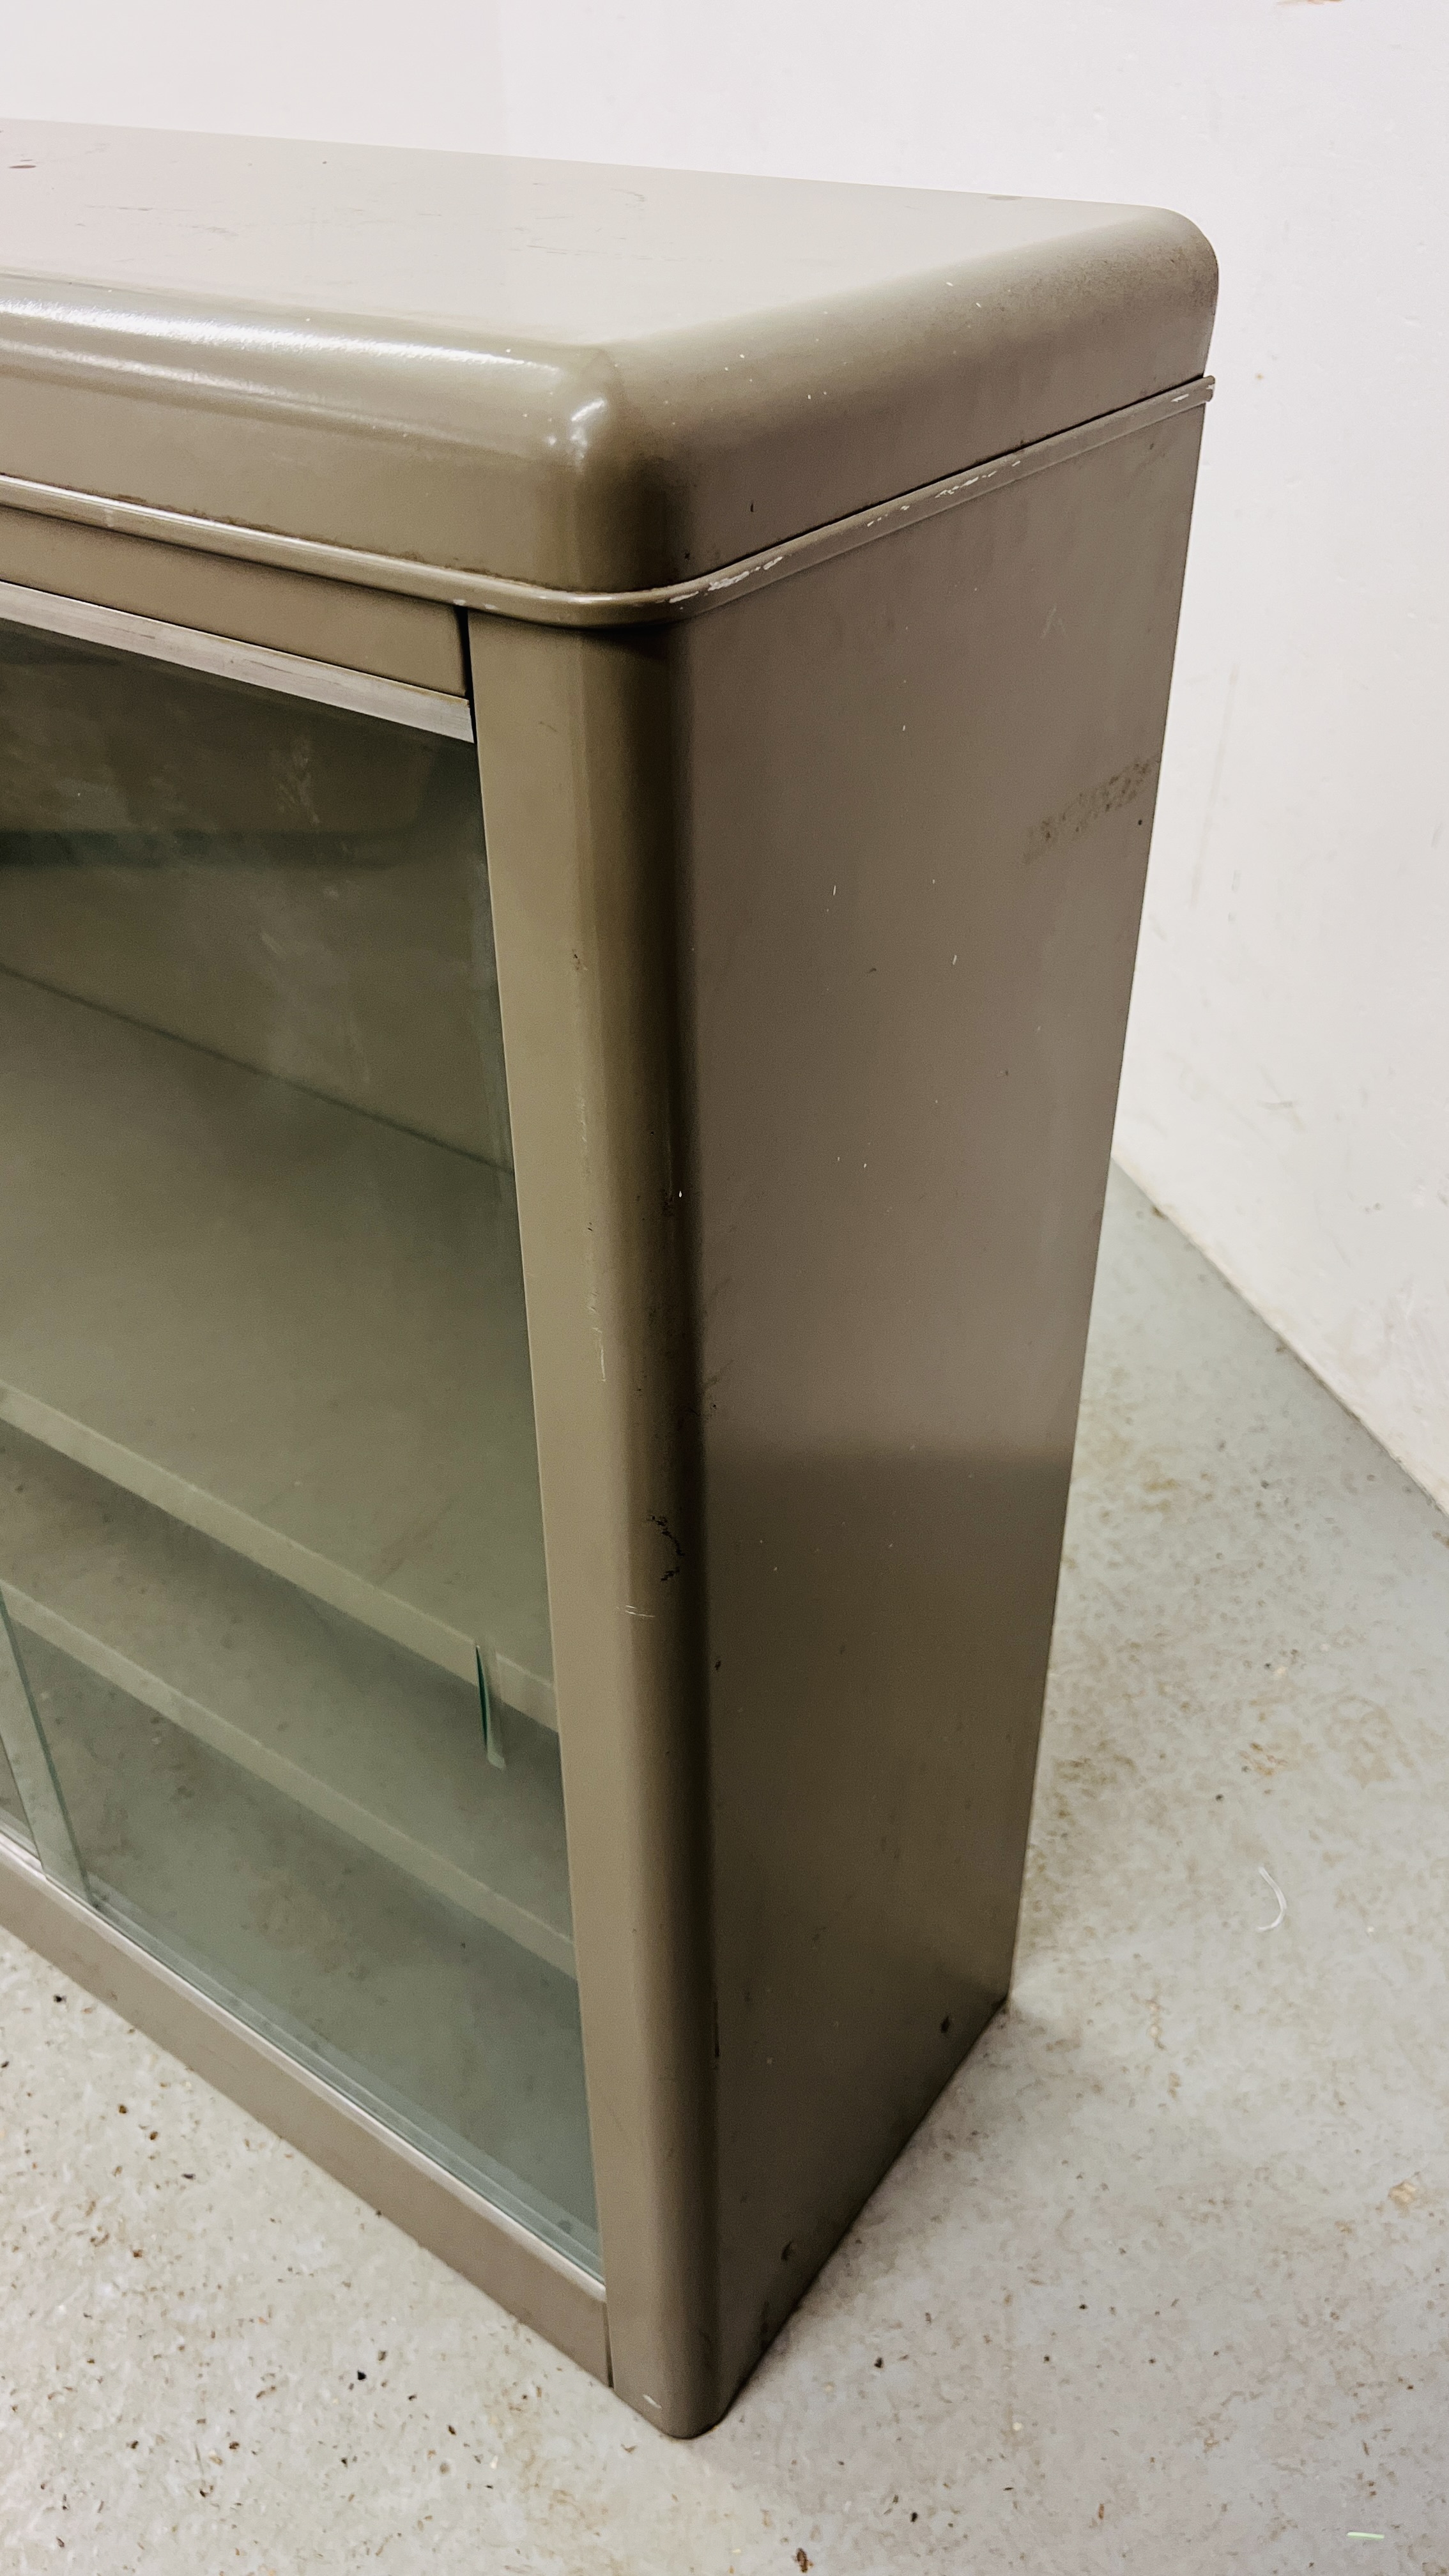 A VINTAGE HOWDEN STEEL EQUIPMENT BOOKCASE WITH SLIDING GLASS DOORS, W 89CM, D 31CM, H 92CM. - Image 6 of 8